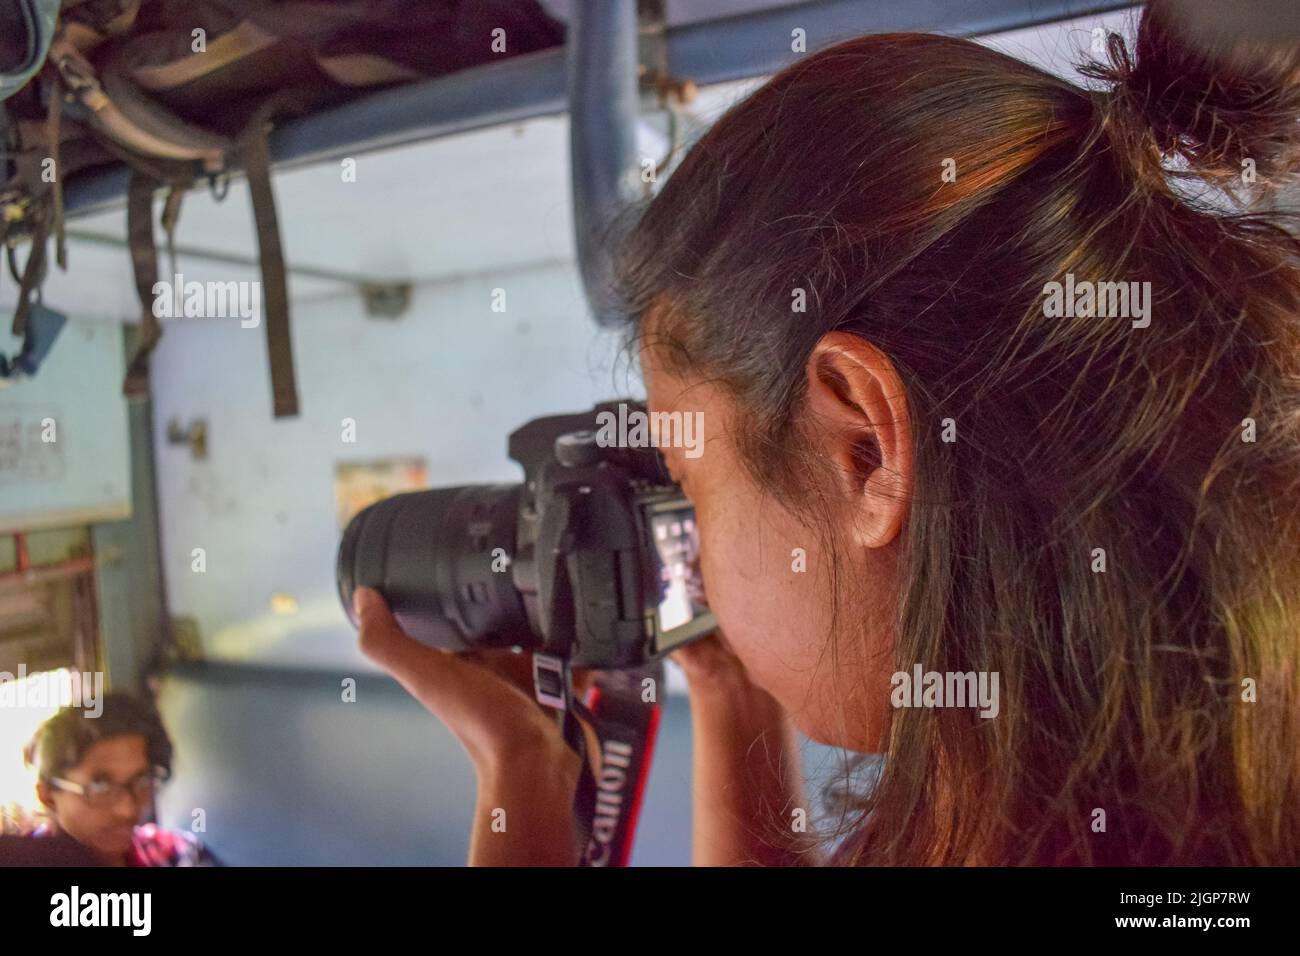 An Indian women taking photos during traveling in a train. women tourist and traveling photography concept Stock Photo